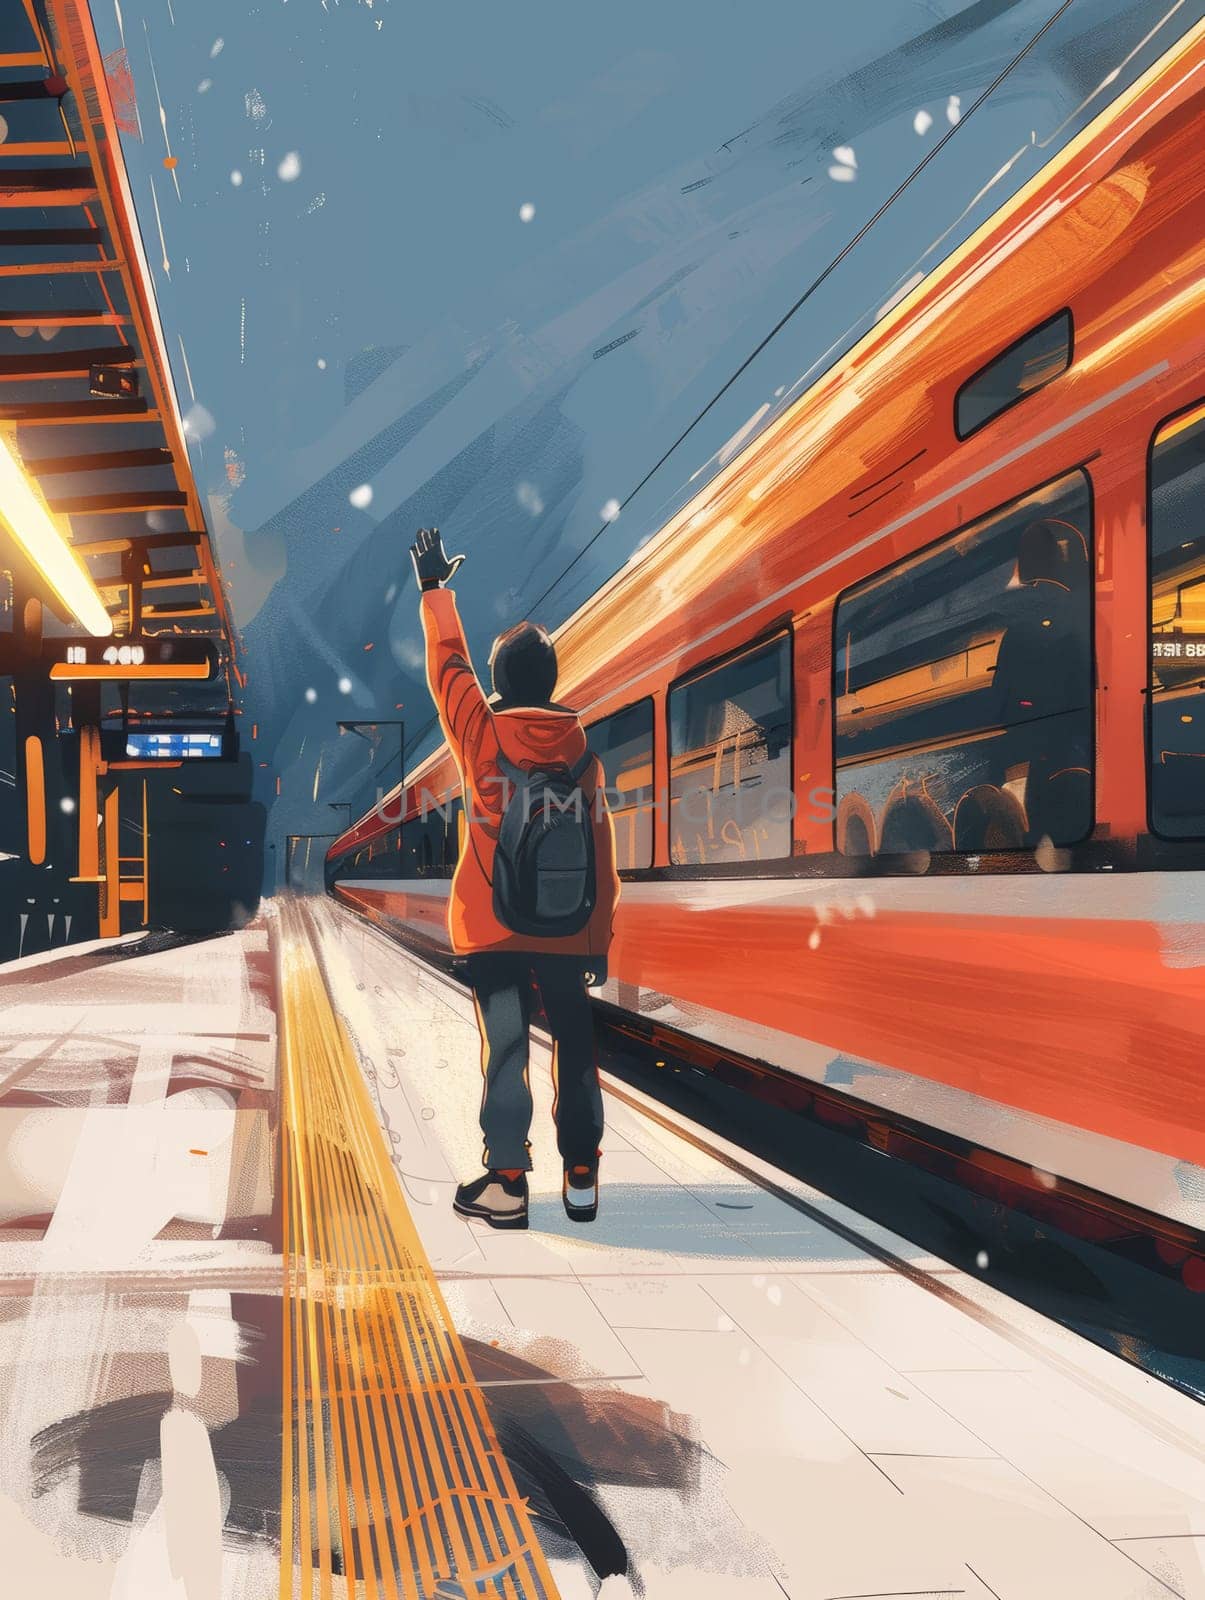 A stylized illustration shows a person waving to a colorful train. The dynamic scene captures the energy of an urban commute. by sfinks